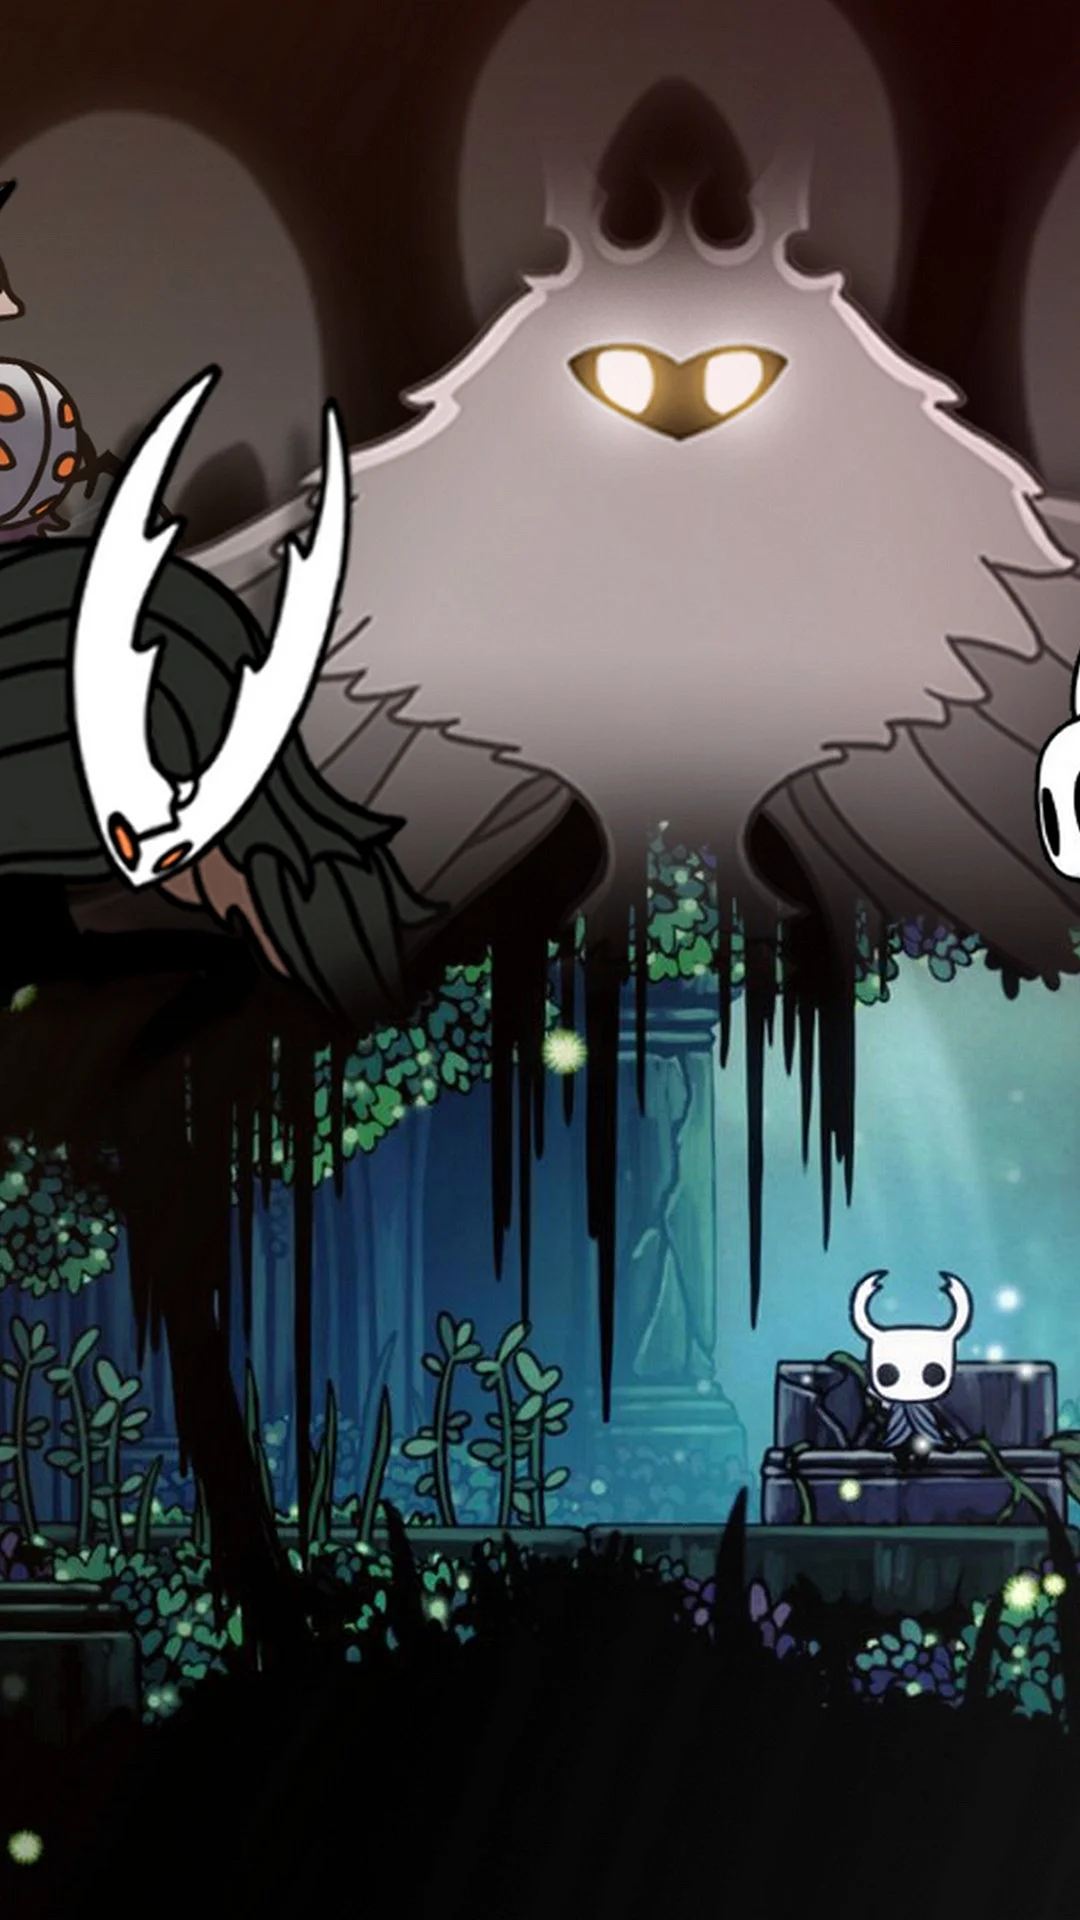 Hollow Knight Gameplay Wallpaper For iPhone